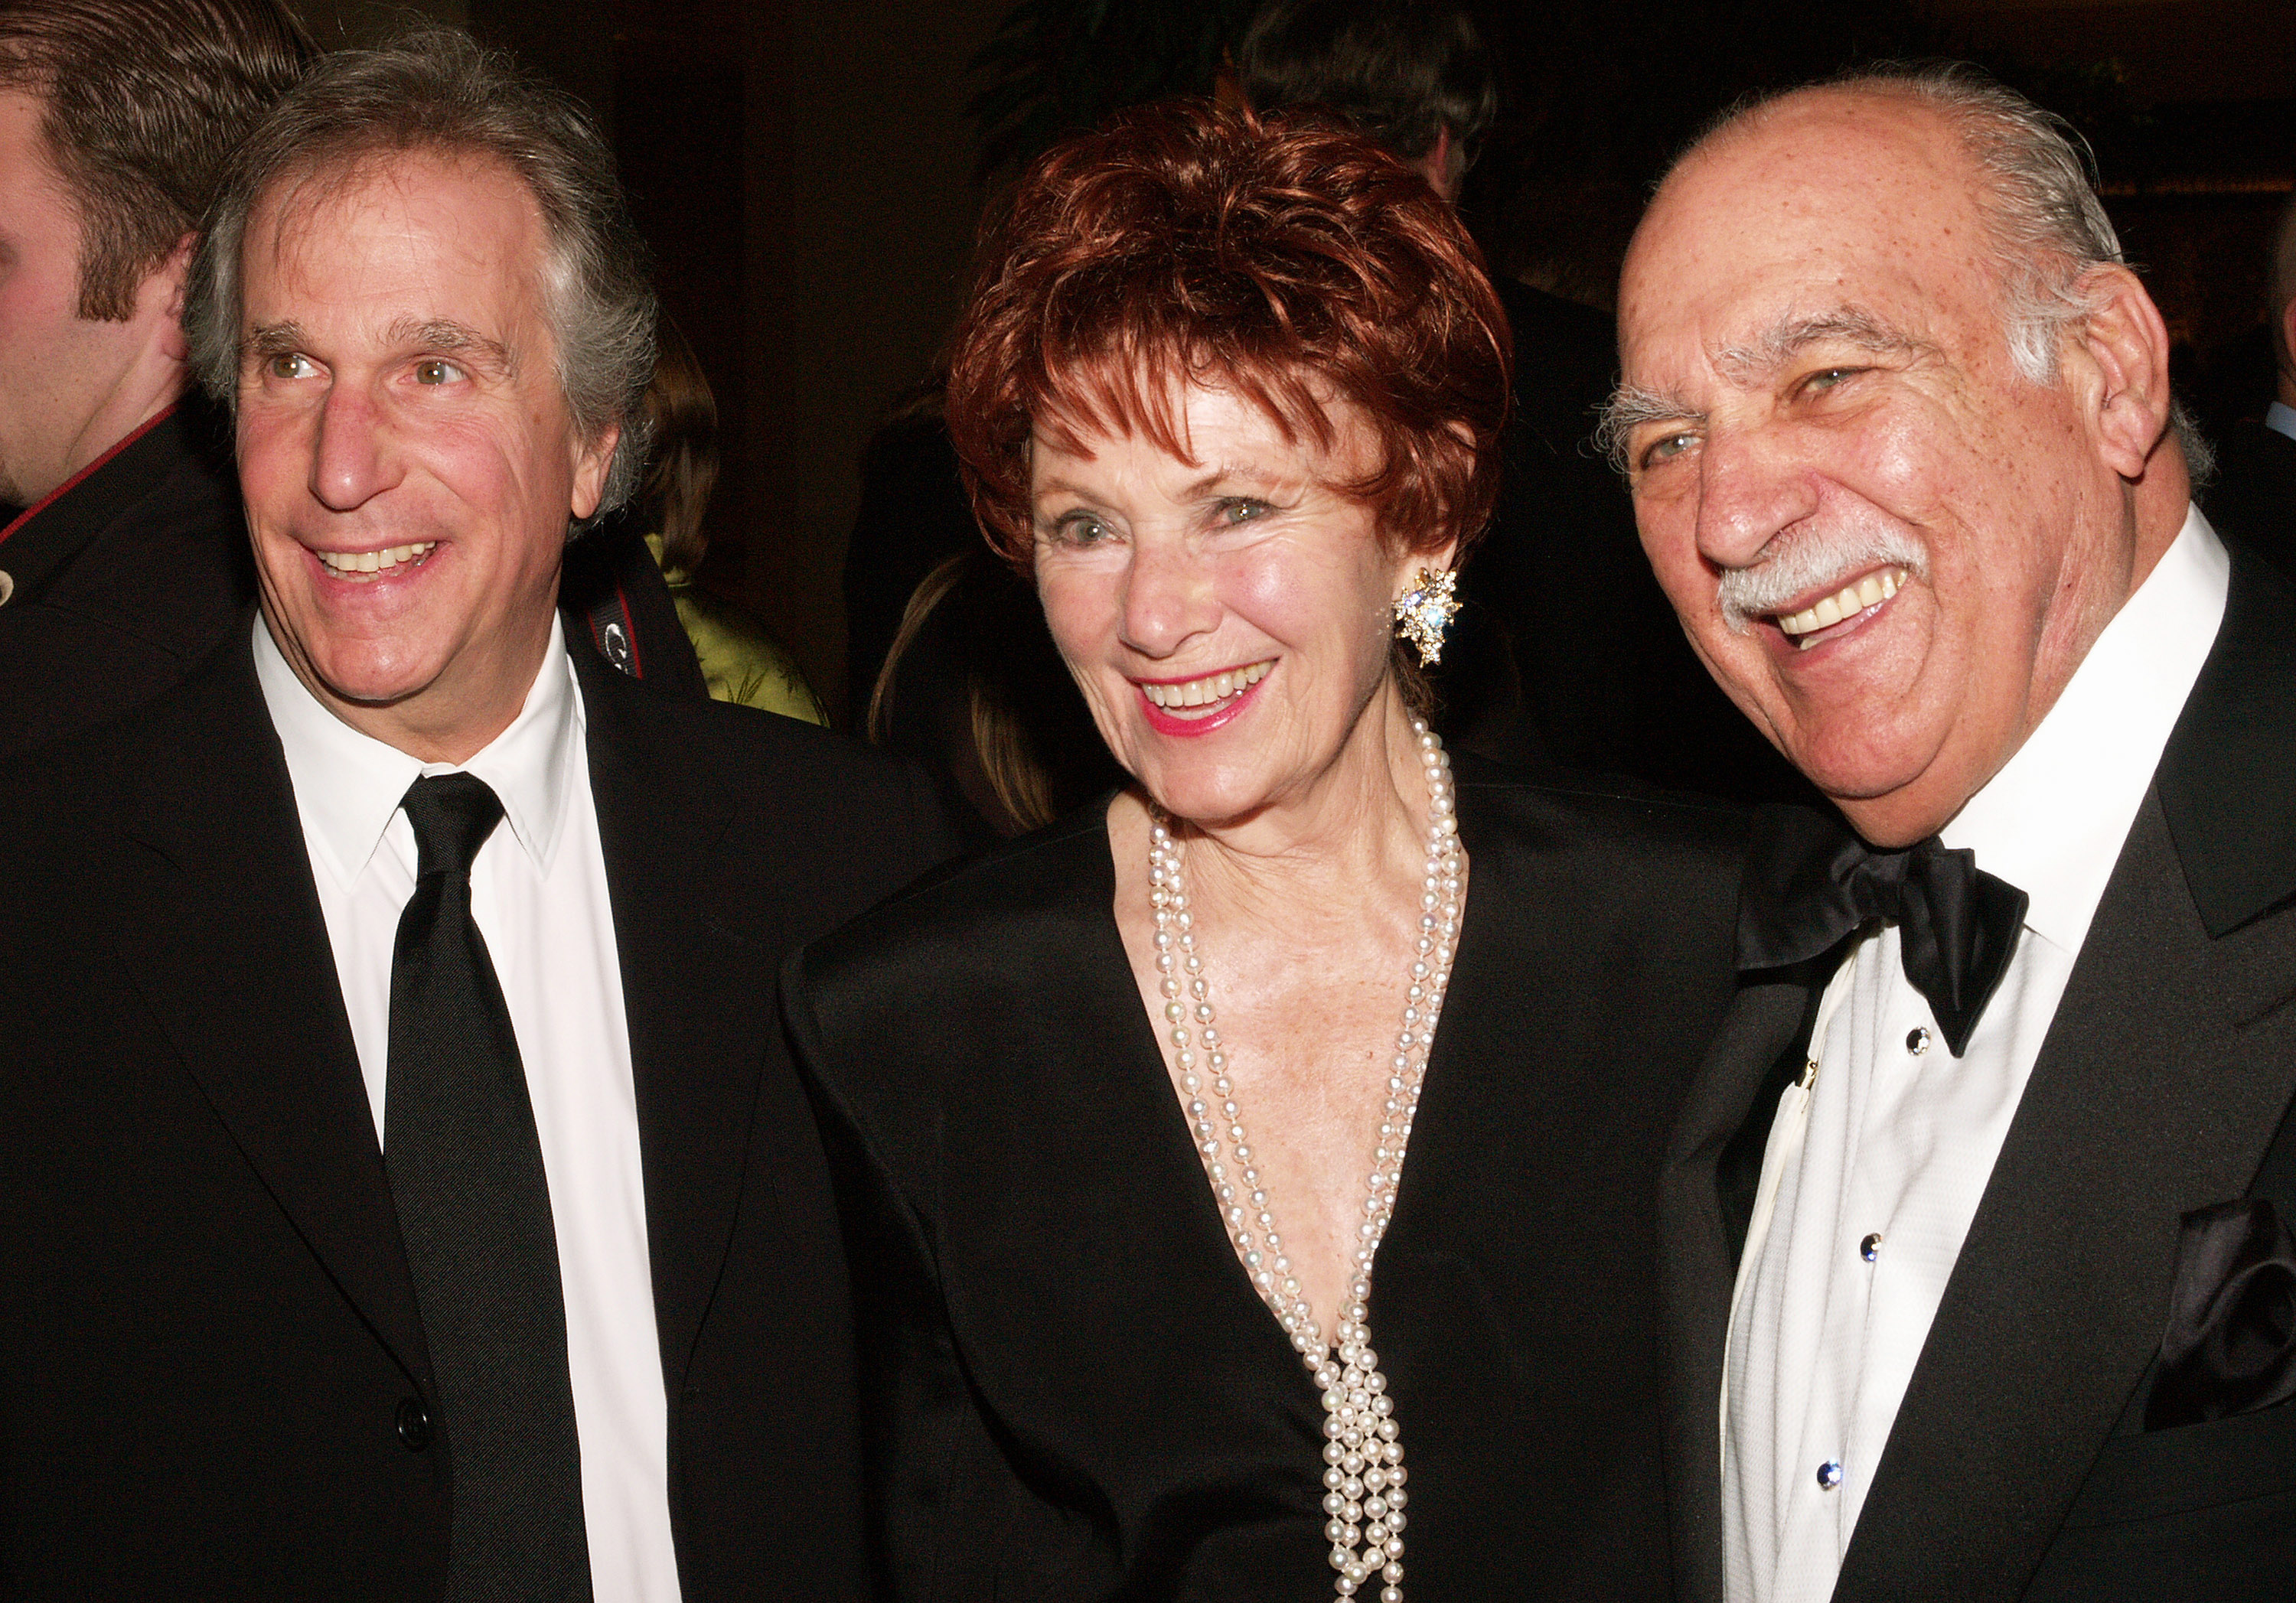 Henry Winkler, Marion Ross and Paul Michael in Beverly Hills, California, 2006 | Source: Getty Images